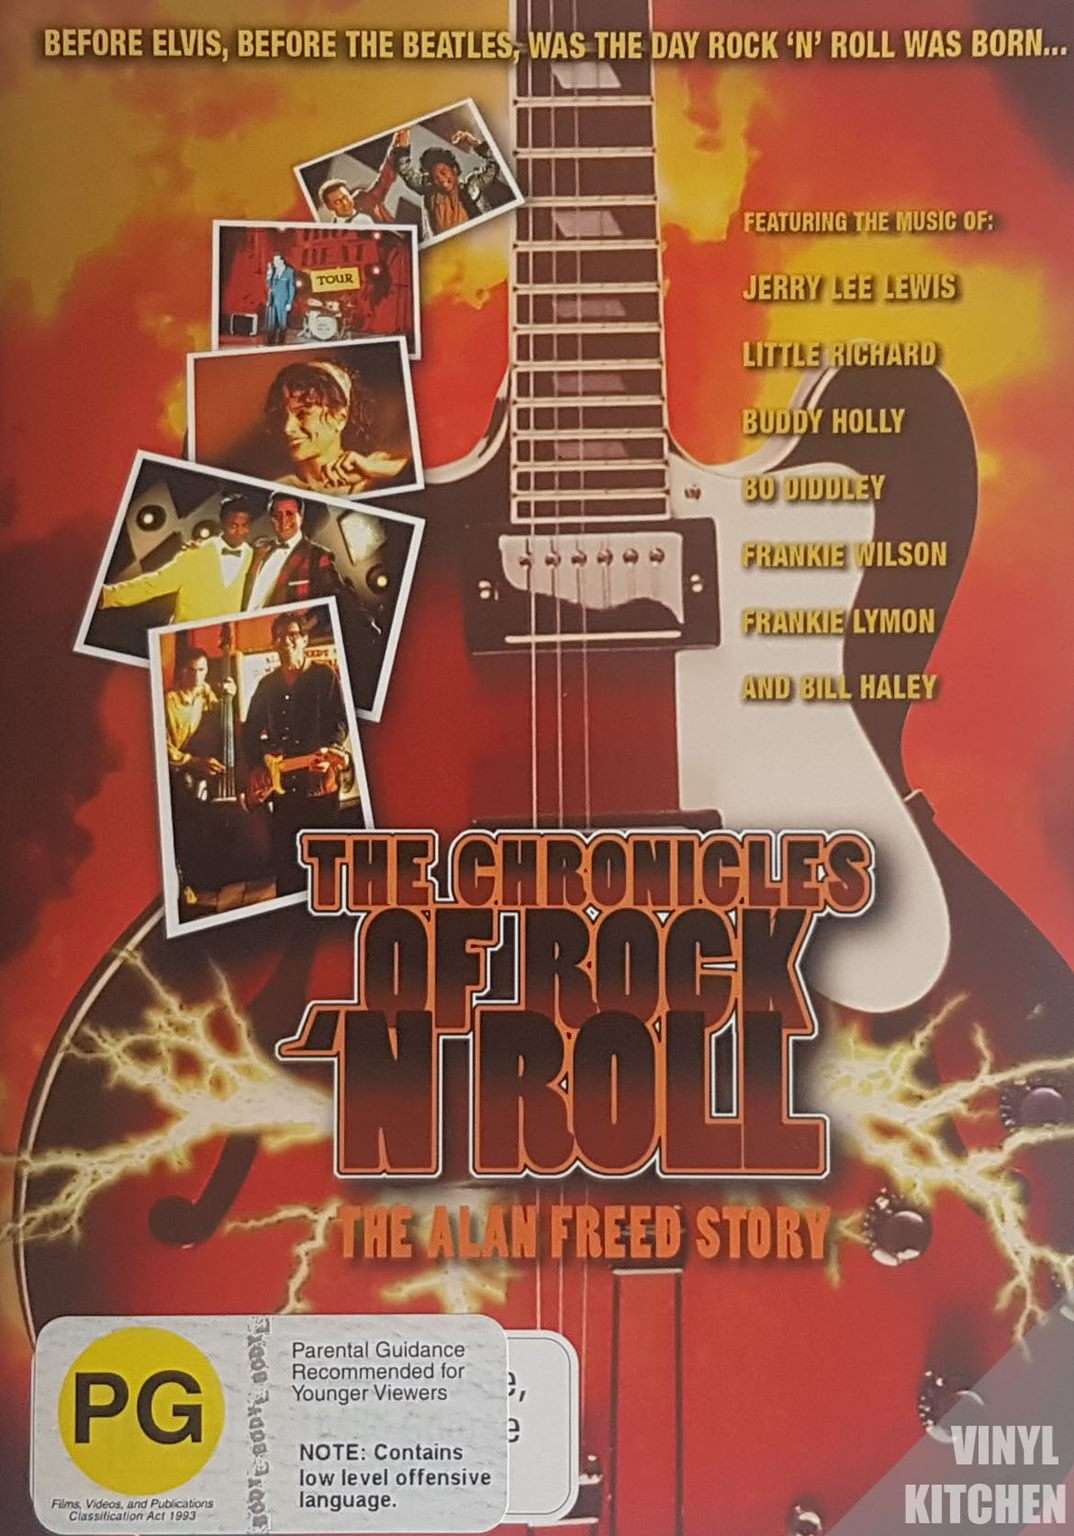 The Chronicles of Rock n Roll: The Alan Freed Story